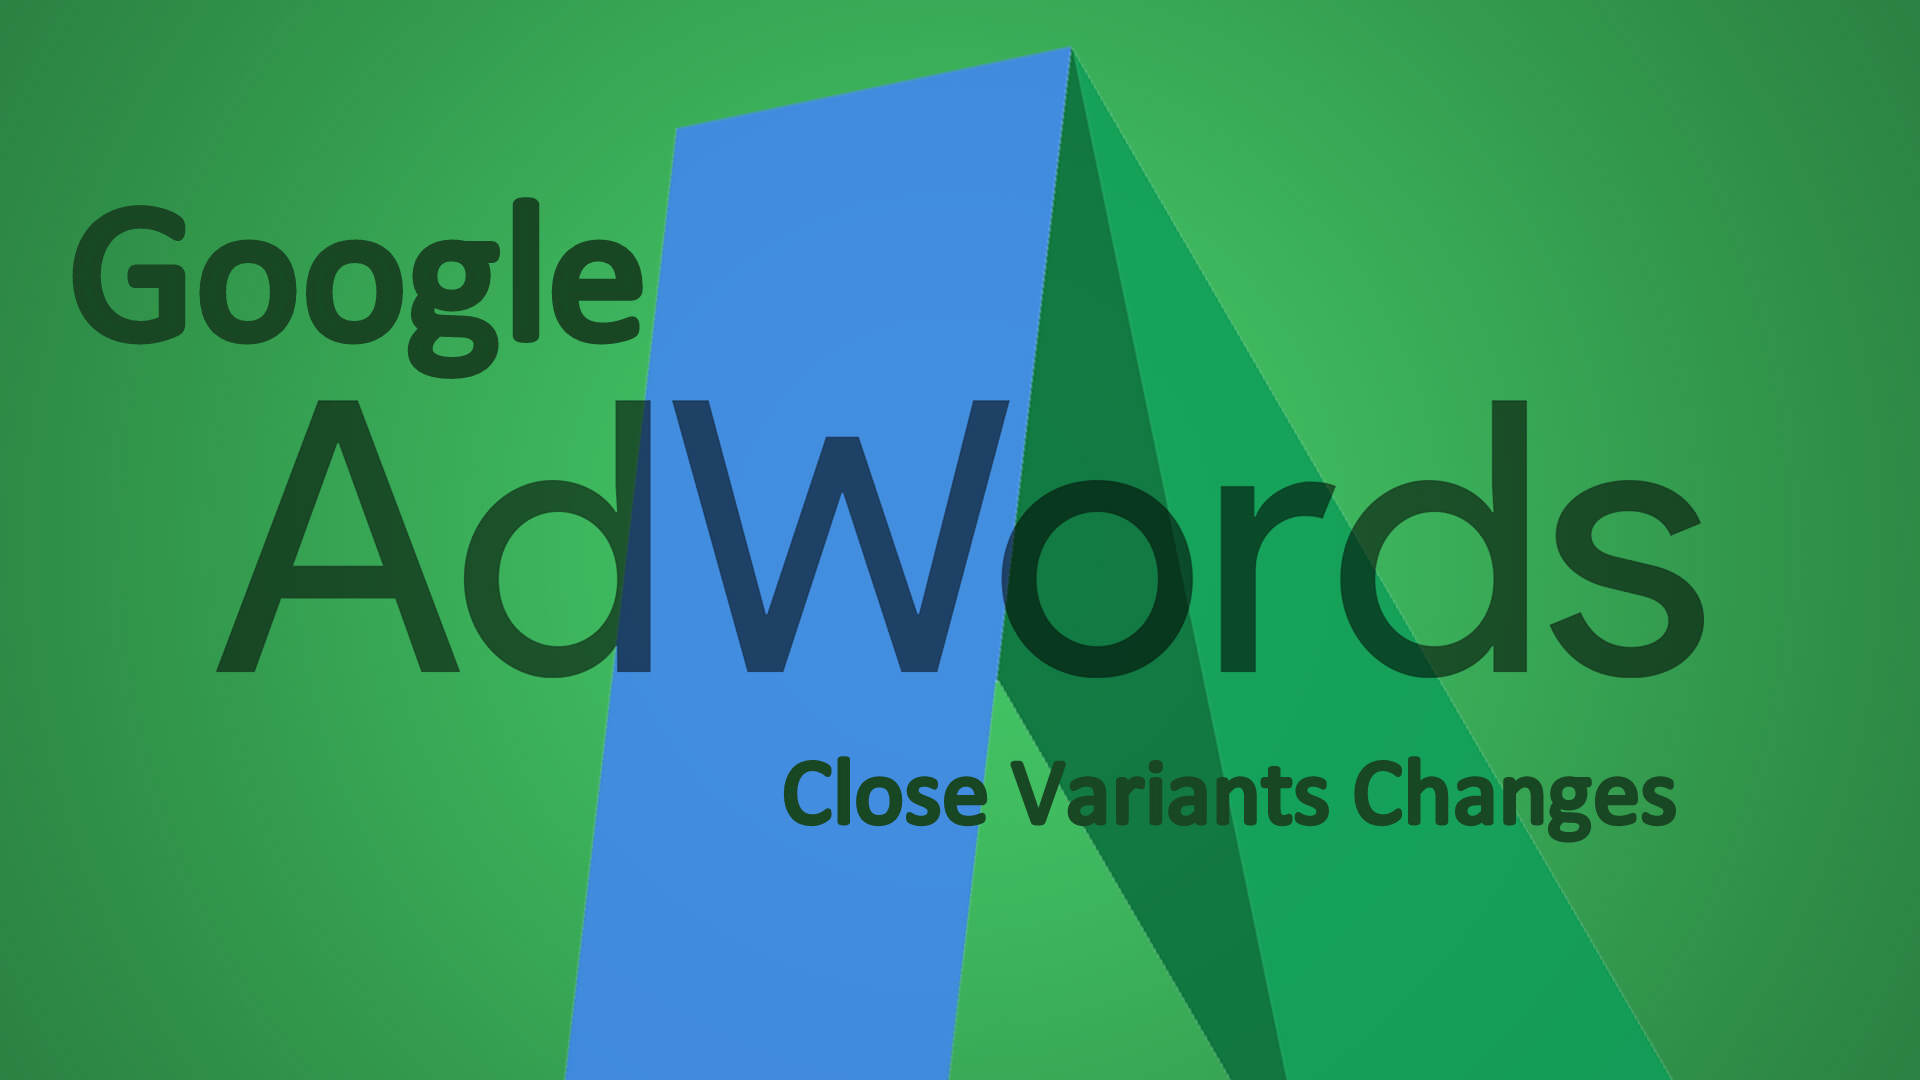 Close Variants Changes by Google AdWords that Shows more Relevant Result